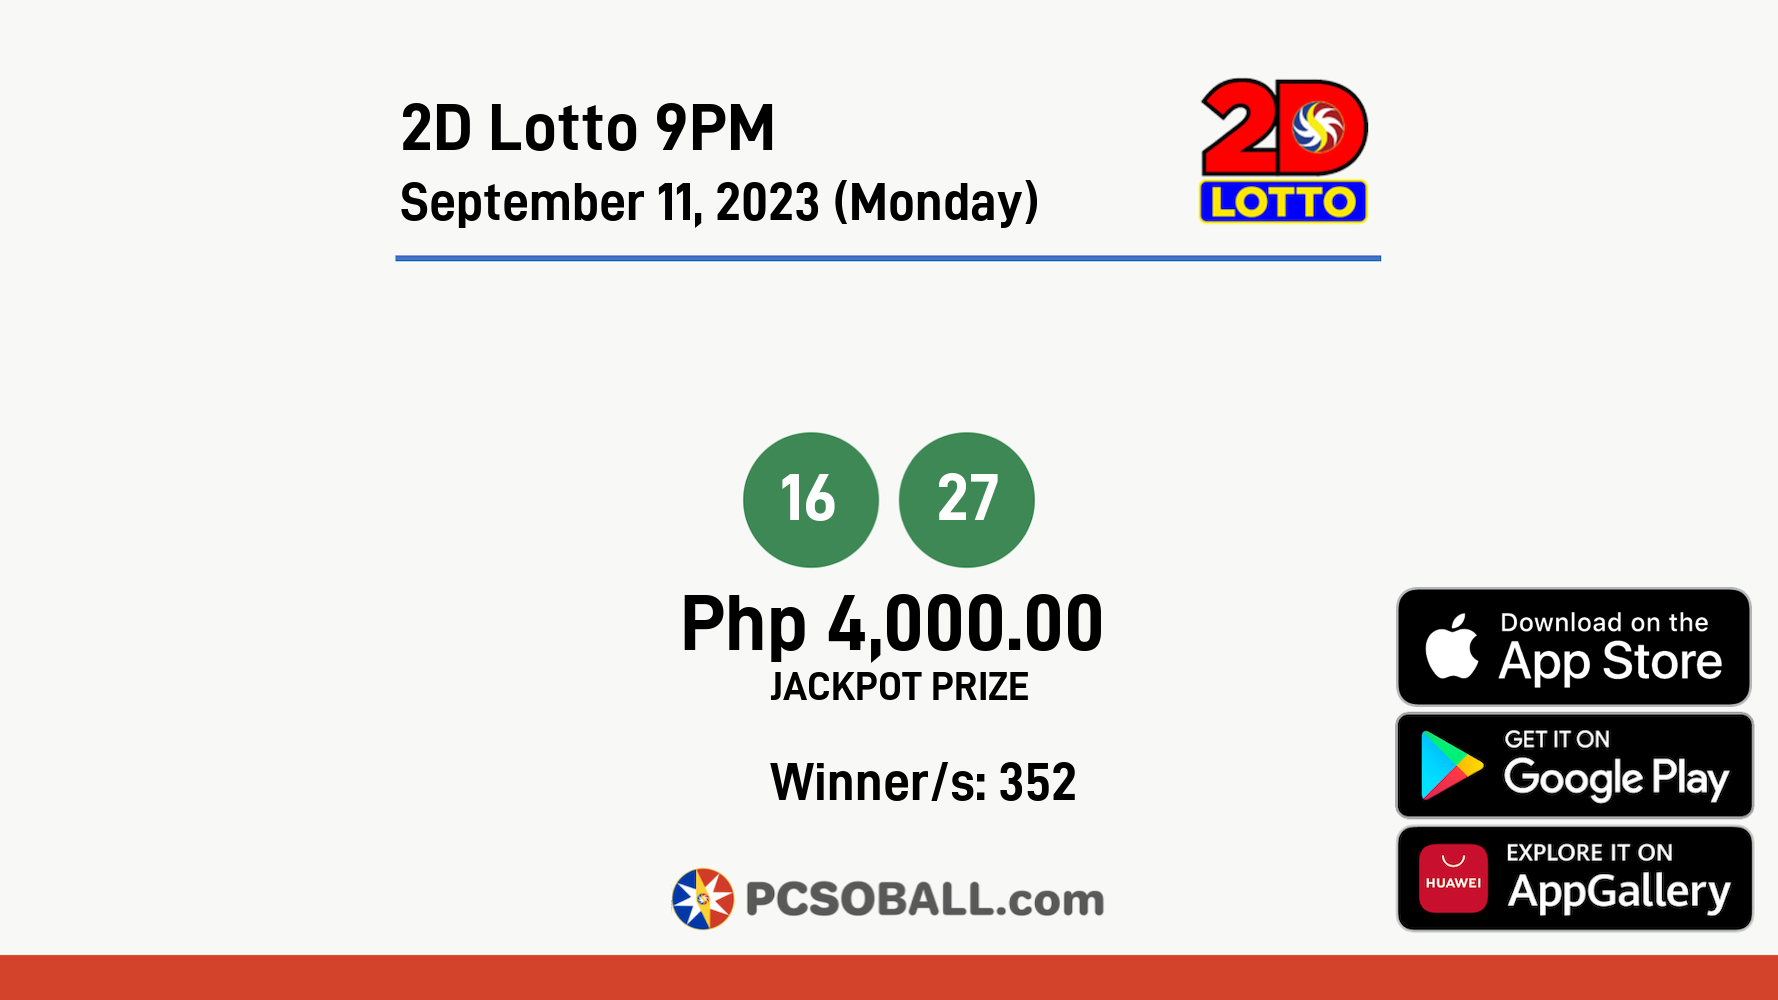 2D Lotto 9PM September 11, 2023 (Monday) Result